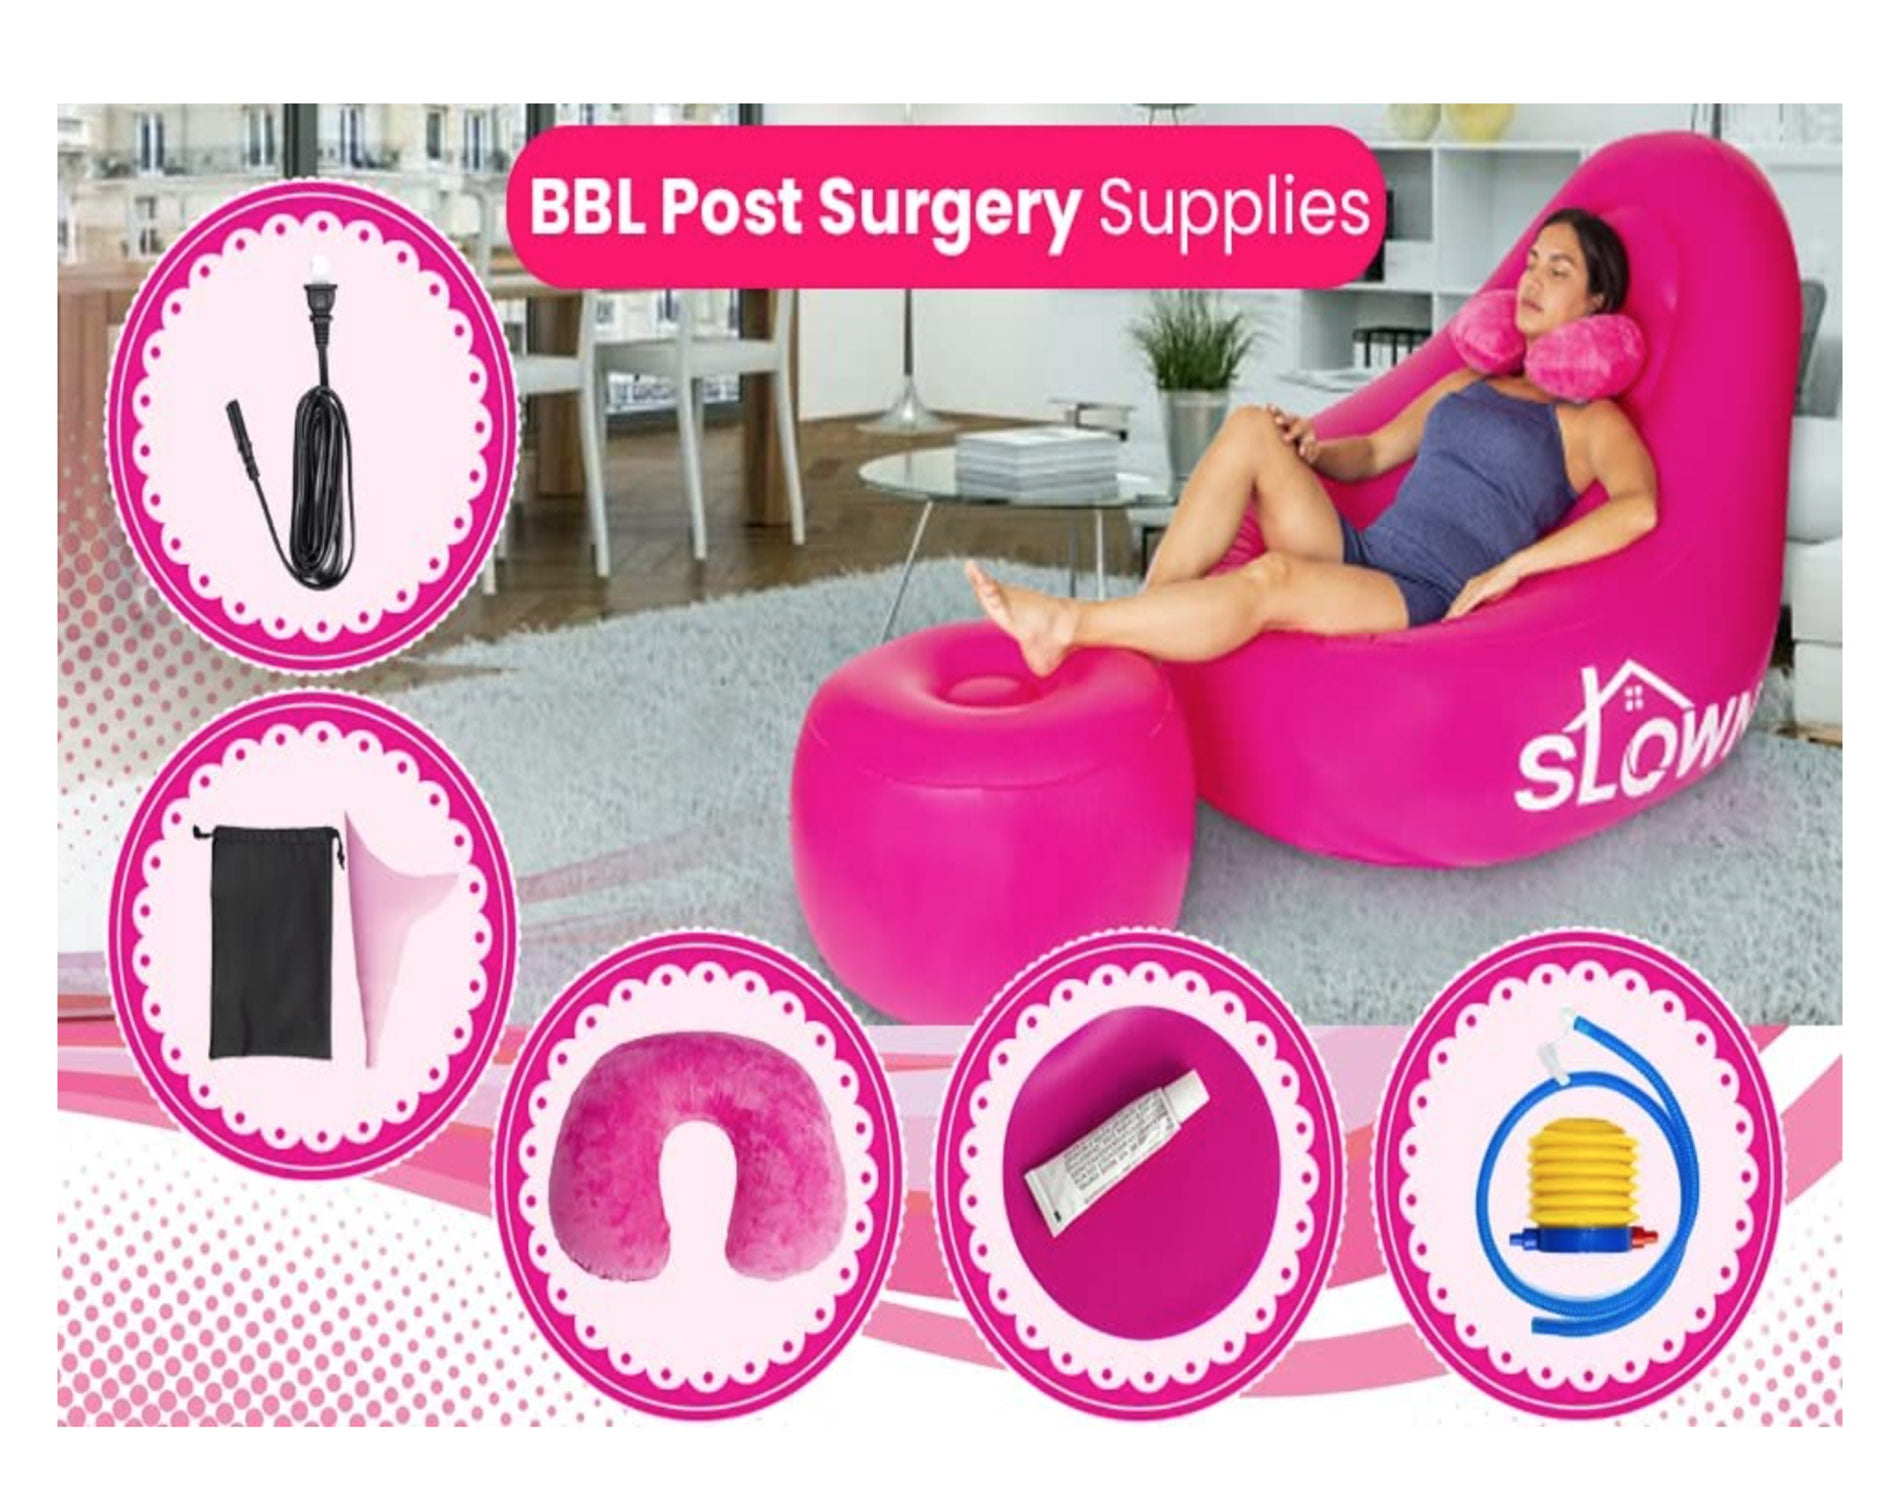 Socivis BBL Chair After Surgery for Butt with Hole with Built-in Air Pump, BBL Inflatable Chair Sofa, Brazilian Butt Lift Surgery Supplies for Sitting